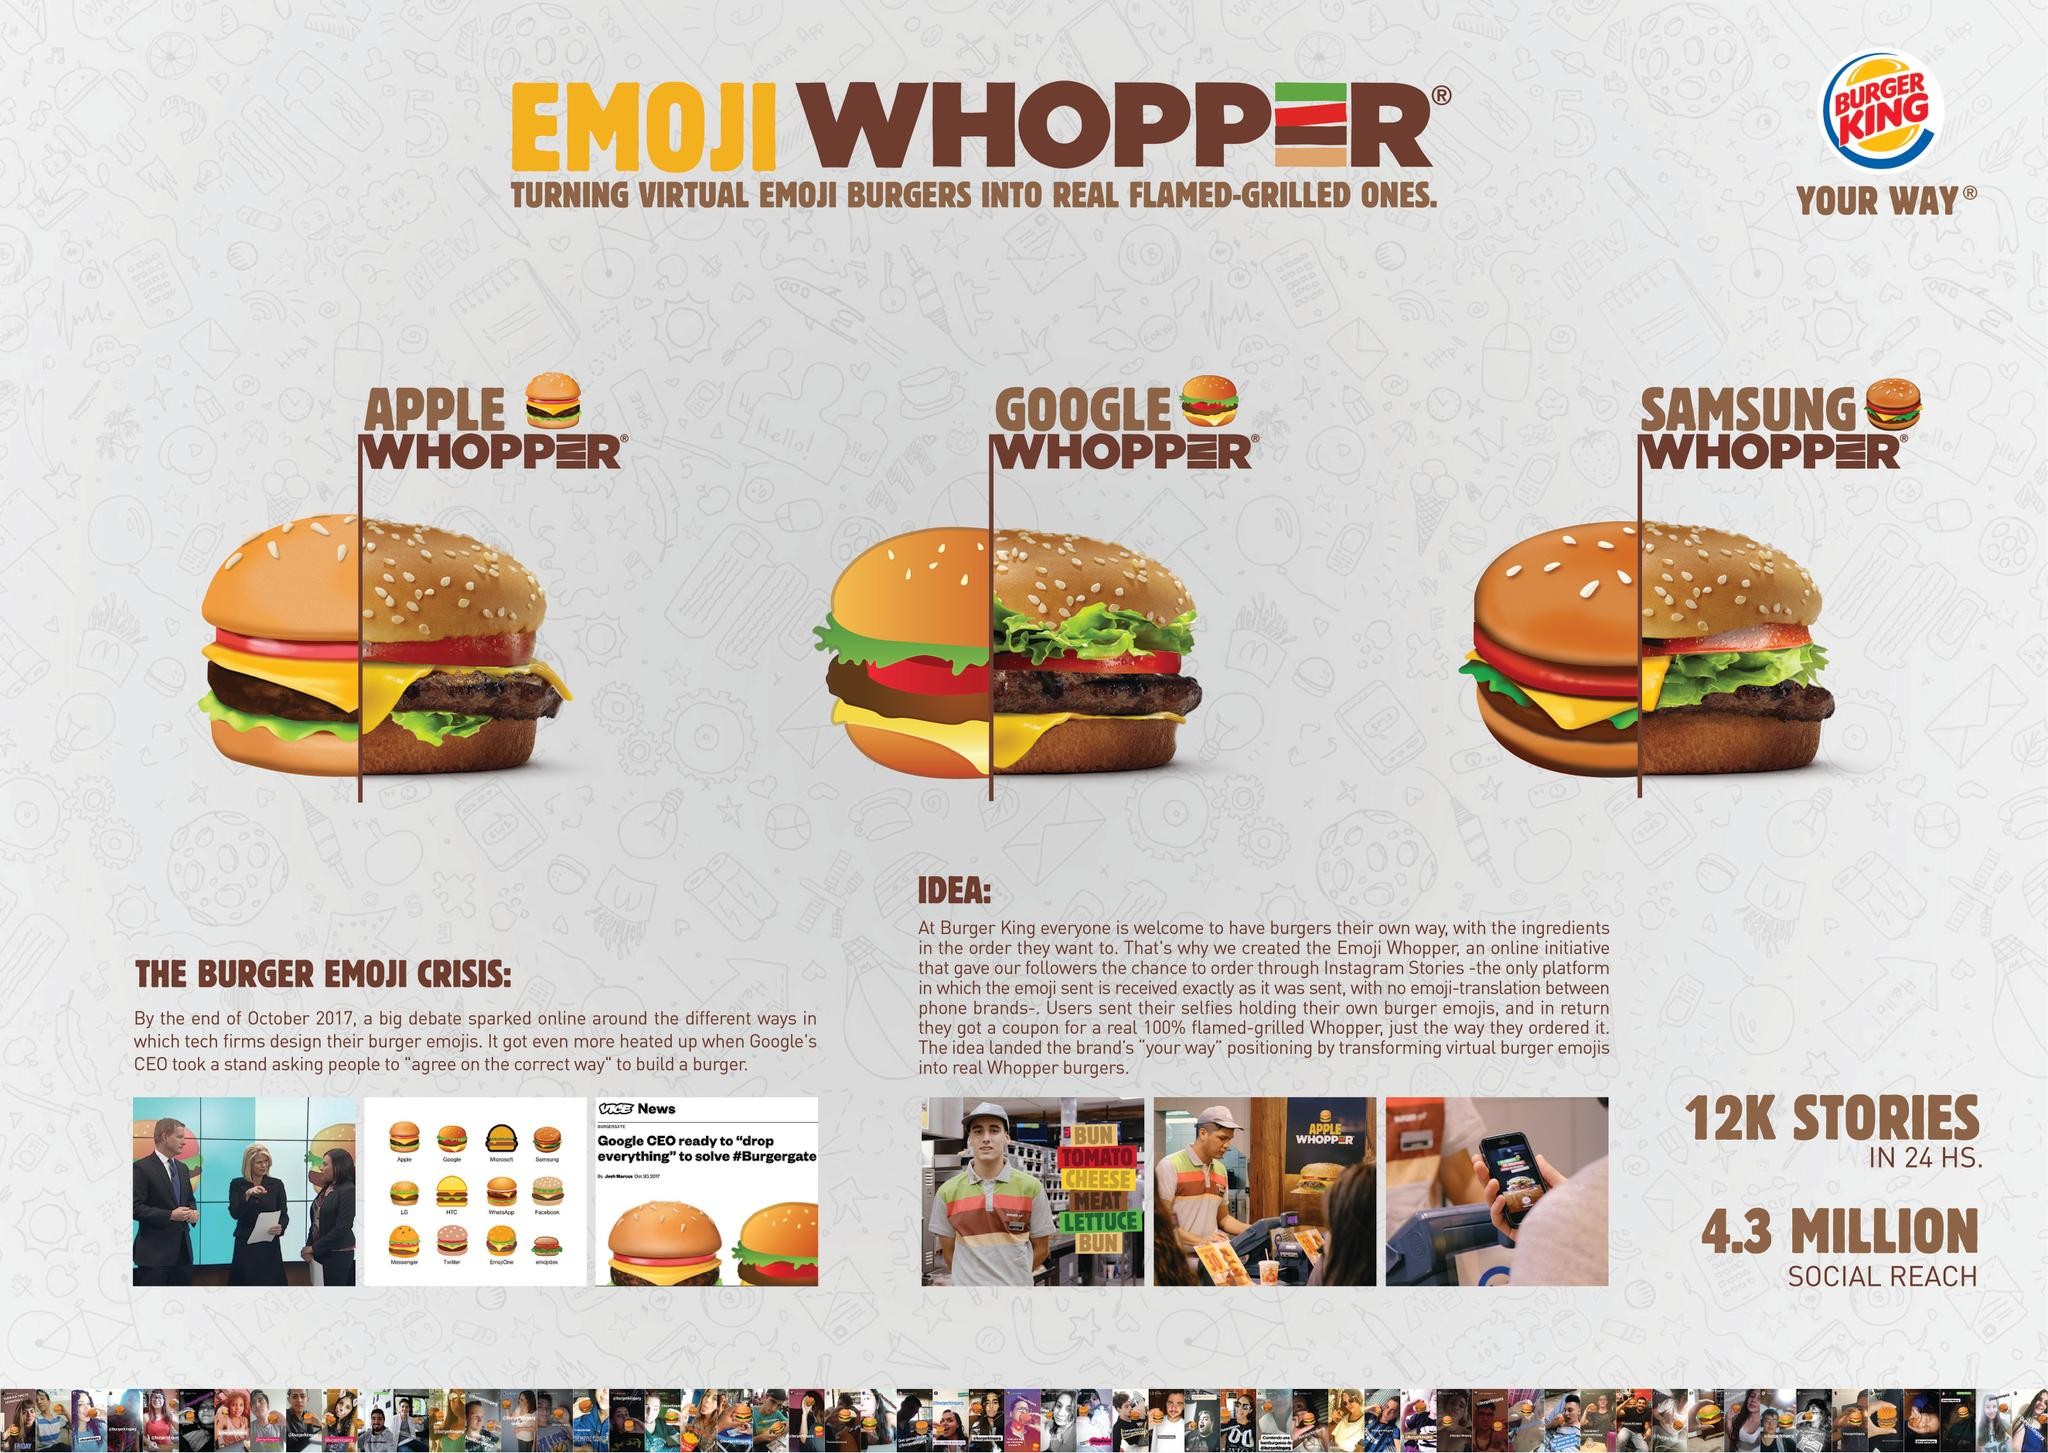 Burger King. What you get what they advertise. Chicken “whopper”. Not  expecting exactly like the ad but at least try to be? This just looks like  they gave up. Also you never